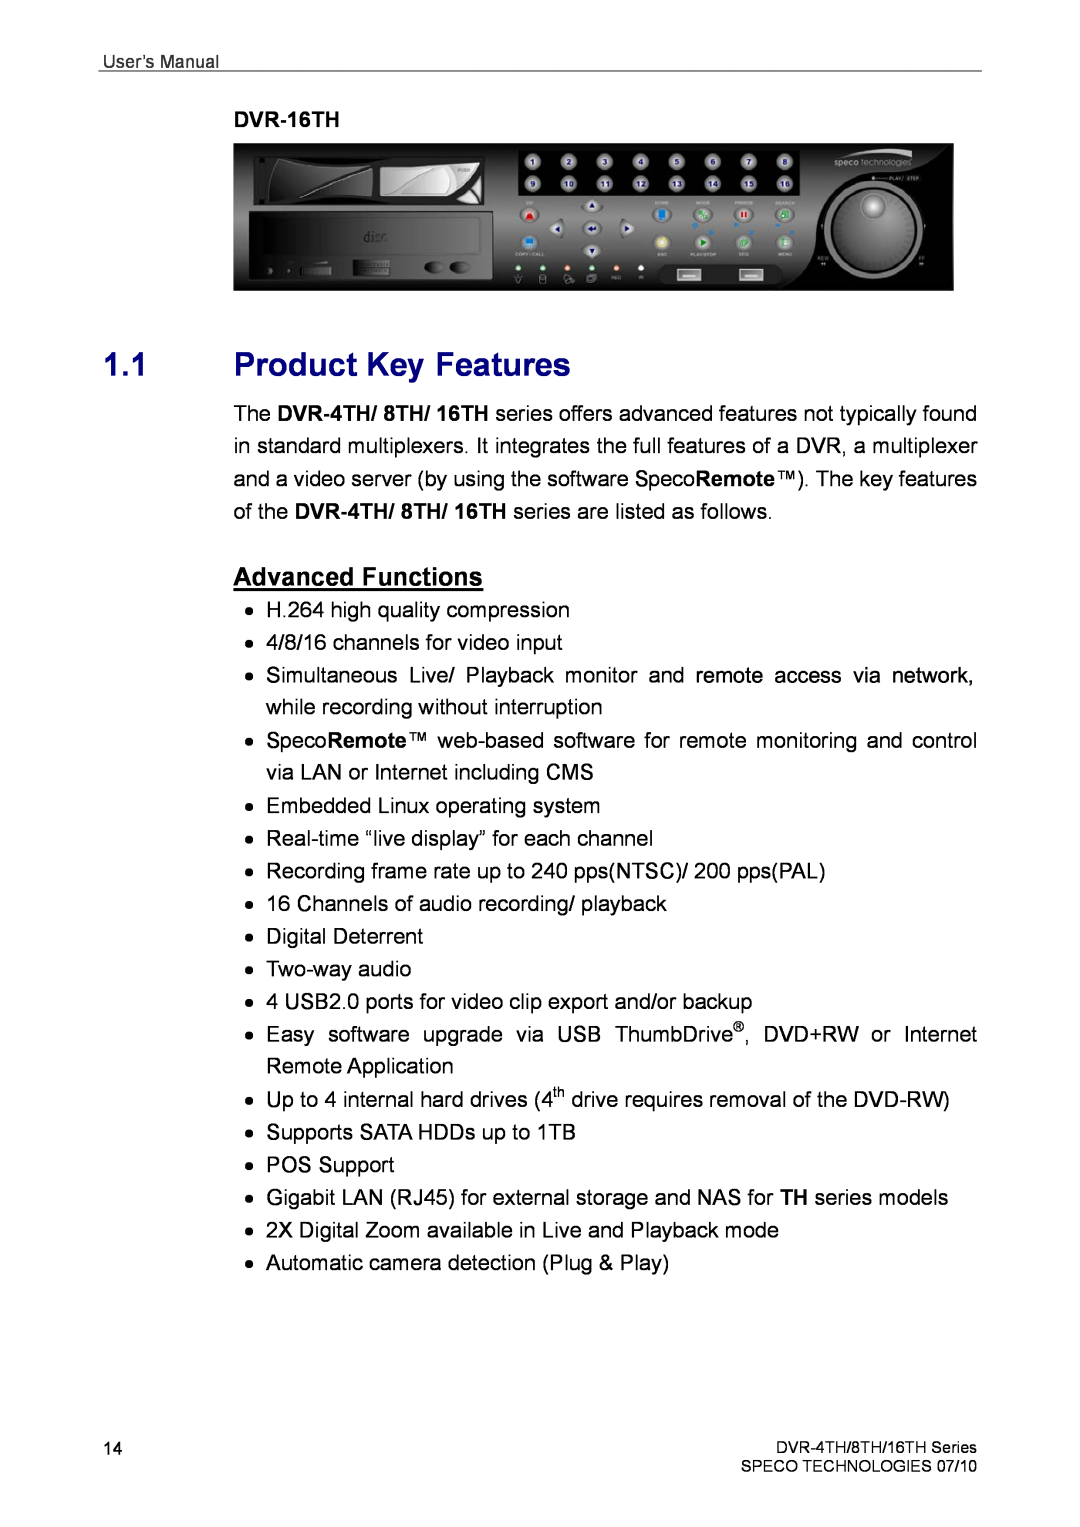 Speco Technologies 8TH, 4TH user manual Product Key Features, Advanced Functions, DVR-16TH 